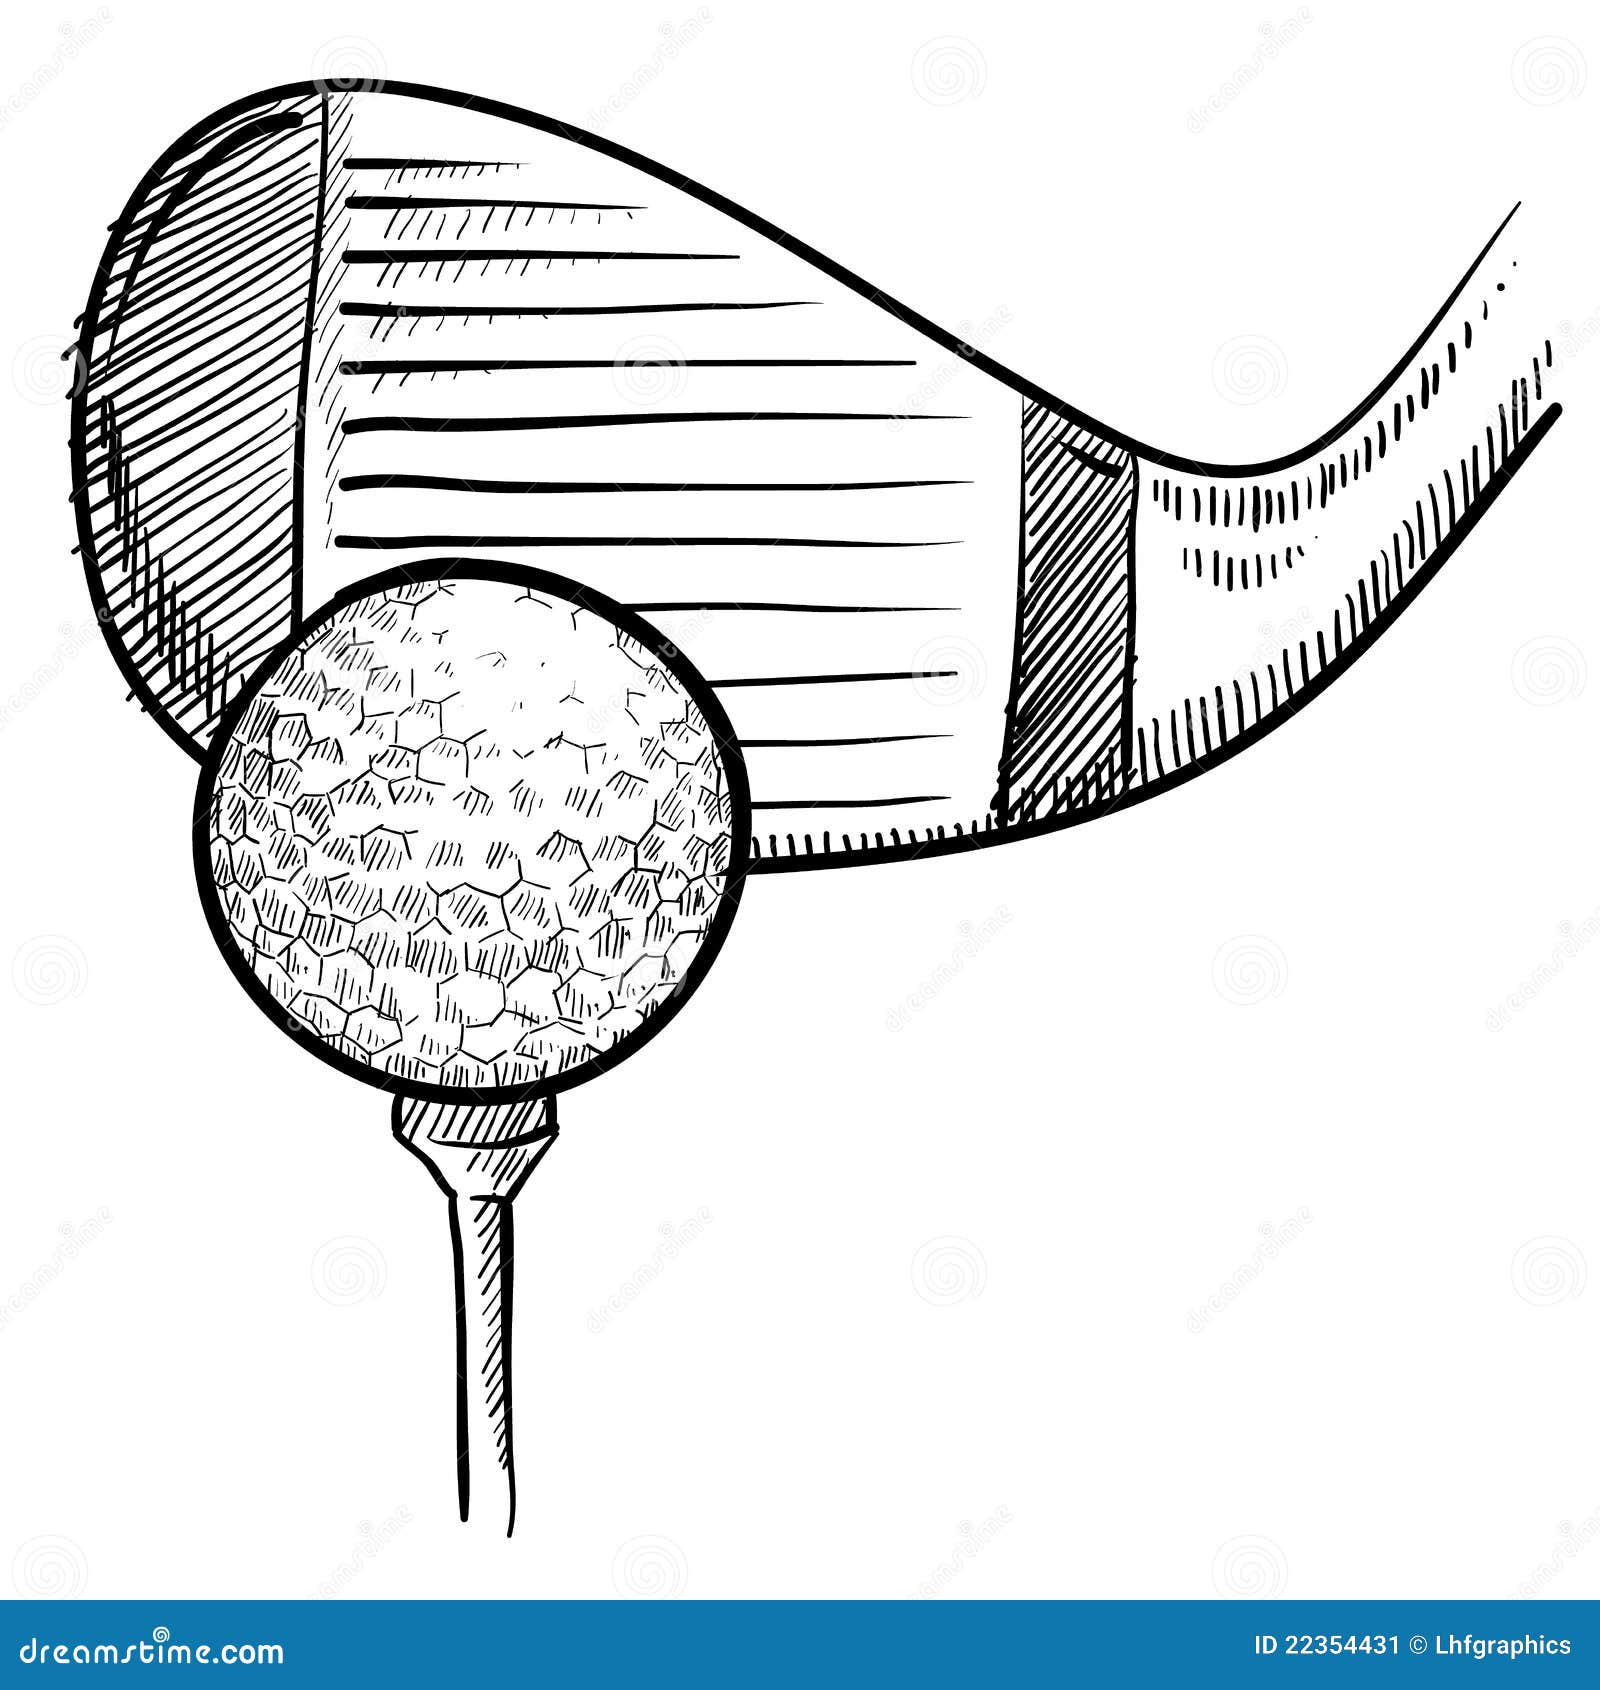 Golf Club And Ball Sketch Stock Image - Image: 22354431